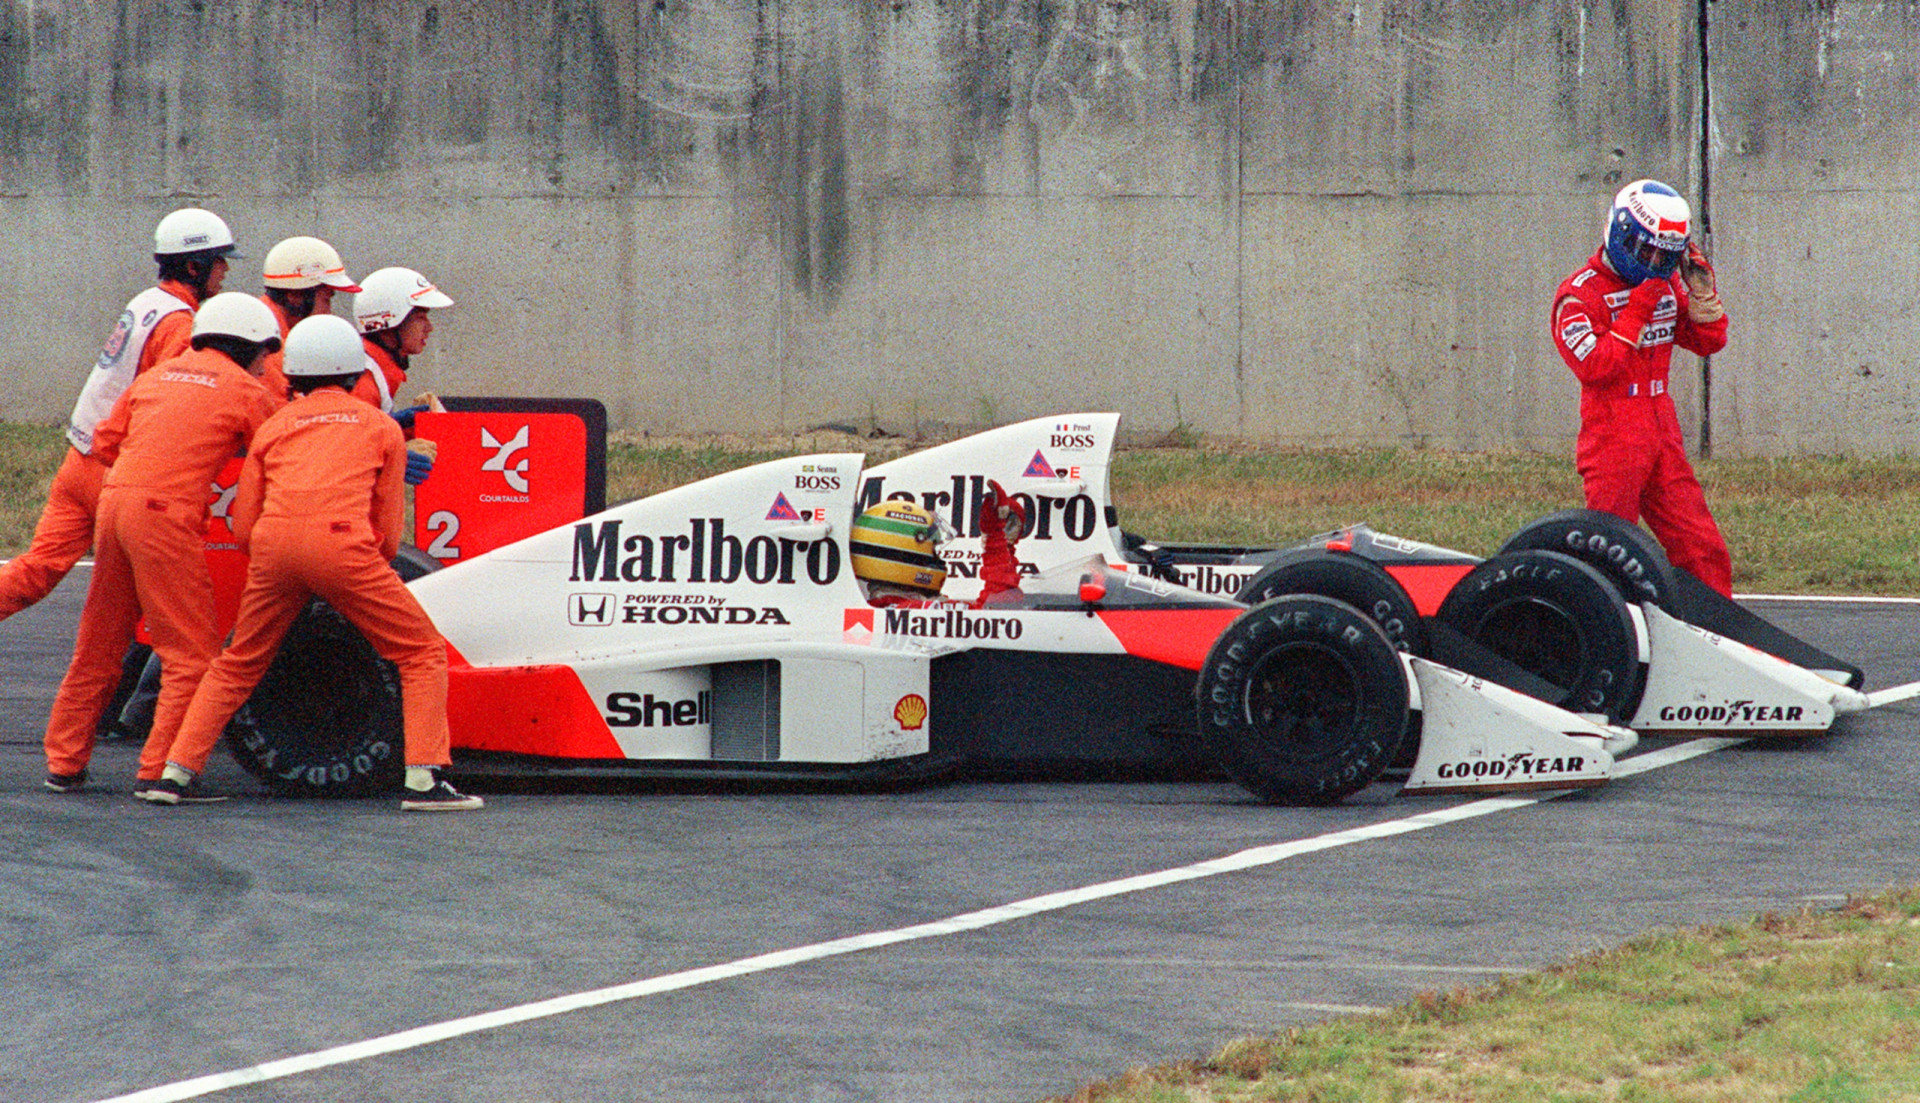 <p>During the penultimate race of the 1989 season at Suzuka in Japan, which Senna had to win in order to retain his title, Prost provoked a collision that sent both men sliding to a standstill. While the Frenchman decided to abandon the race, Senna urged marshals for a push-start, which he received. The Brazilian went on to win the race, only to be disqualified, thus handing the championship to his rival.</p><p>You may also like:<a href="https://www.starsinsider.com/n/422473?utm_source=msn.com&utm_medium=display&utm_campaign=referral_description&utm_content=703485en-us"> Must-try street food for travelers</a></p>